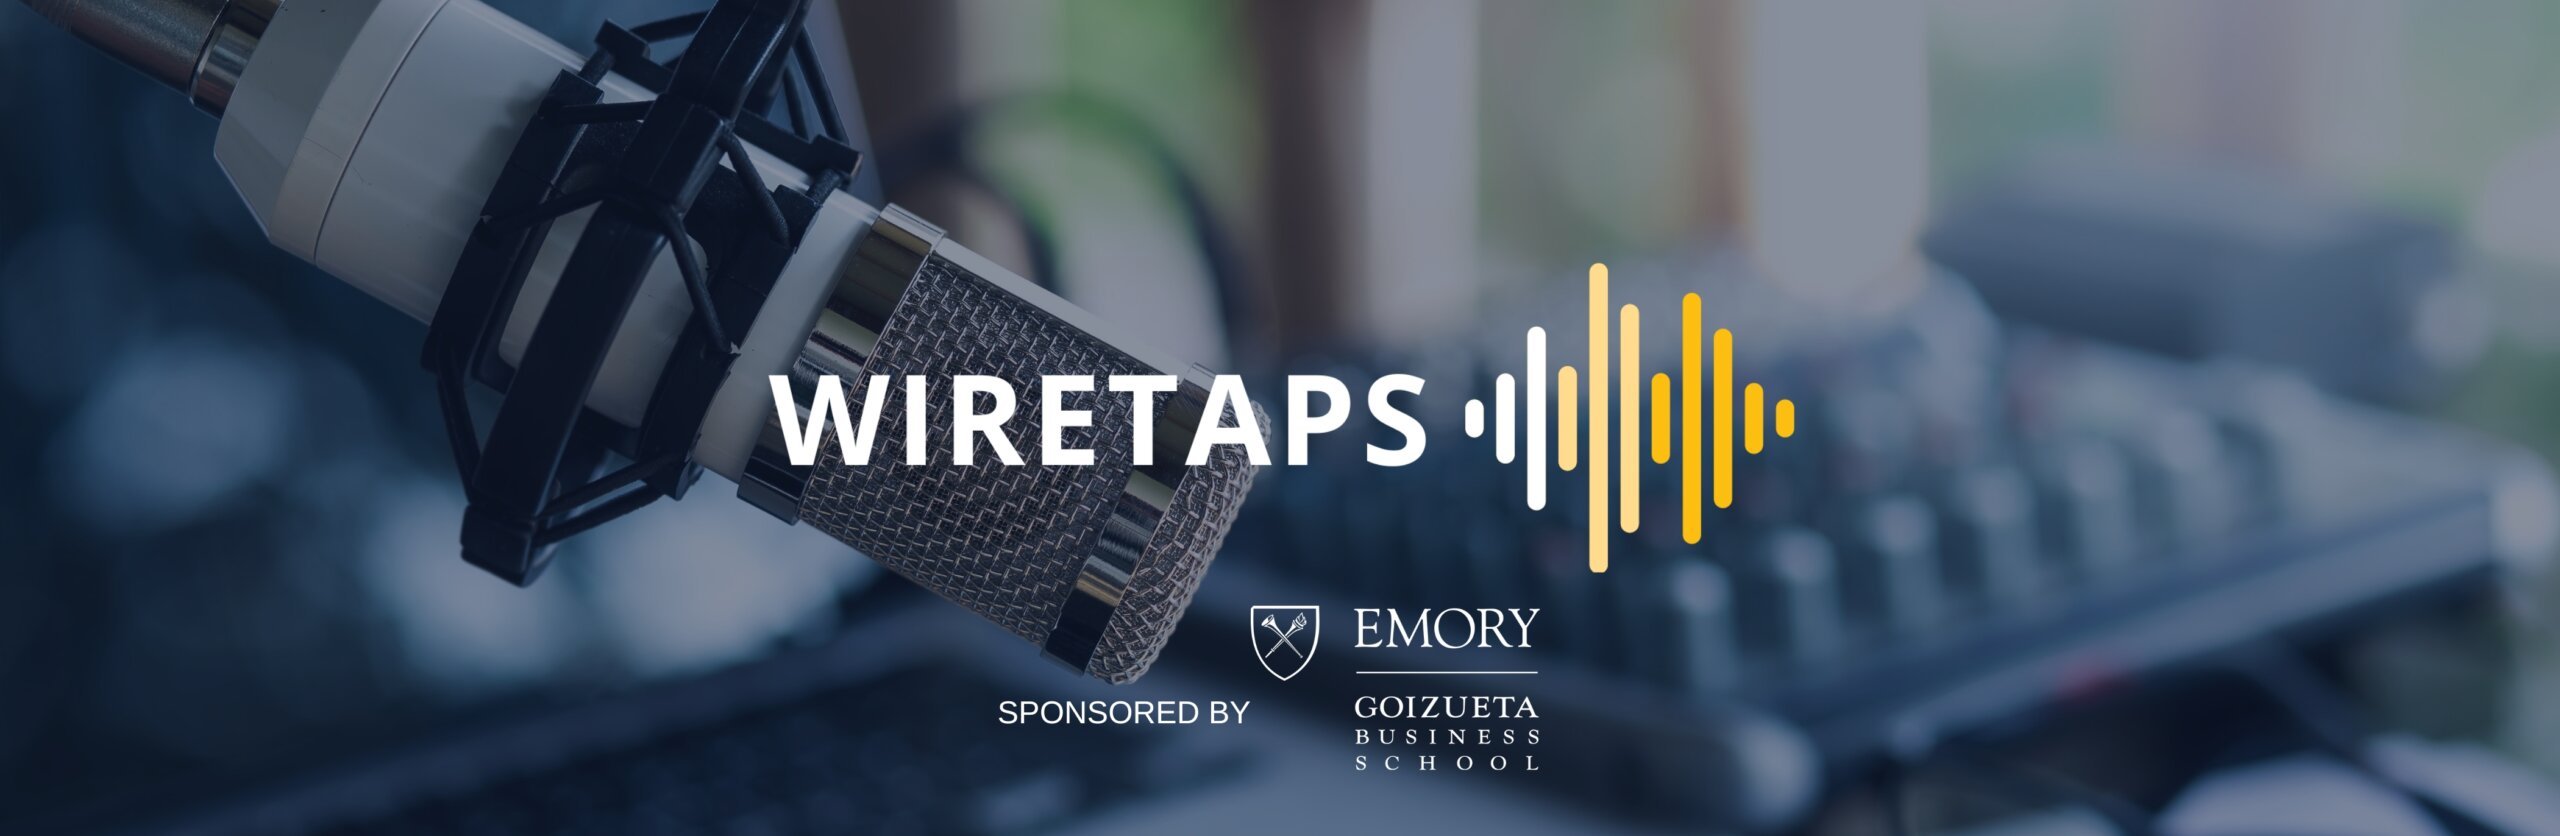 Episode 318 of Clear Admit's MBA Admissions Wire Taps Podcast